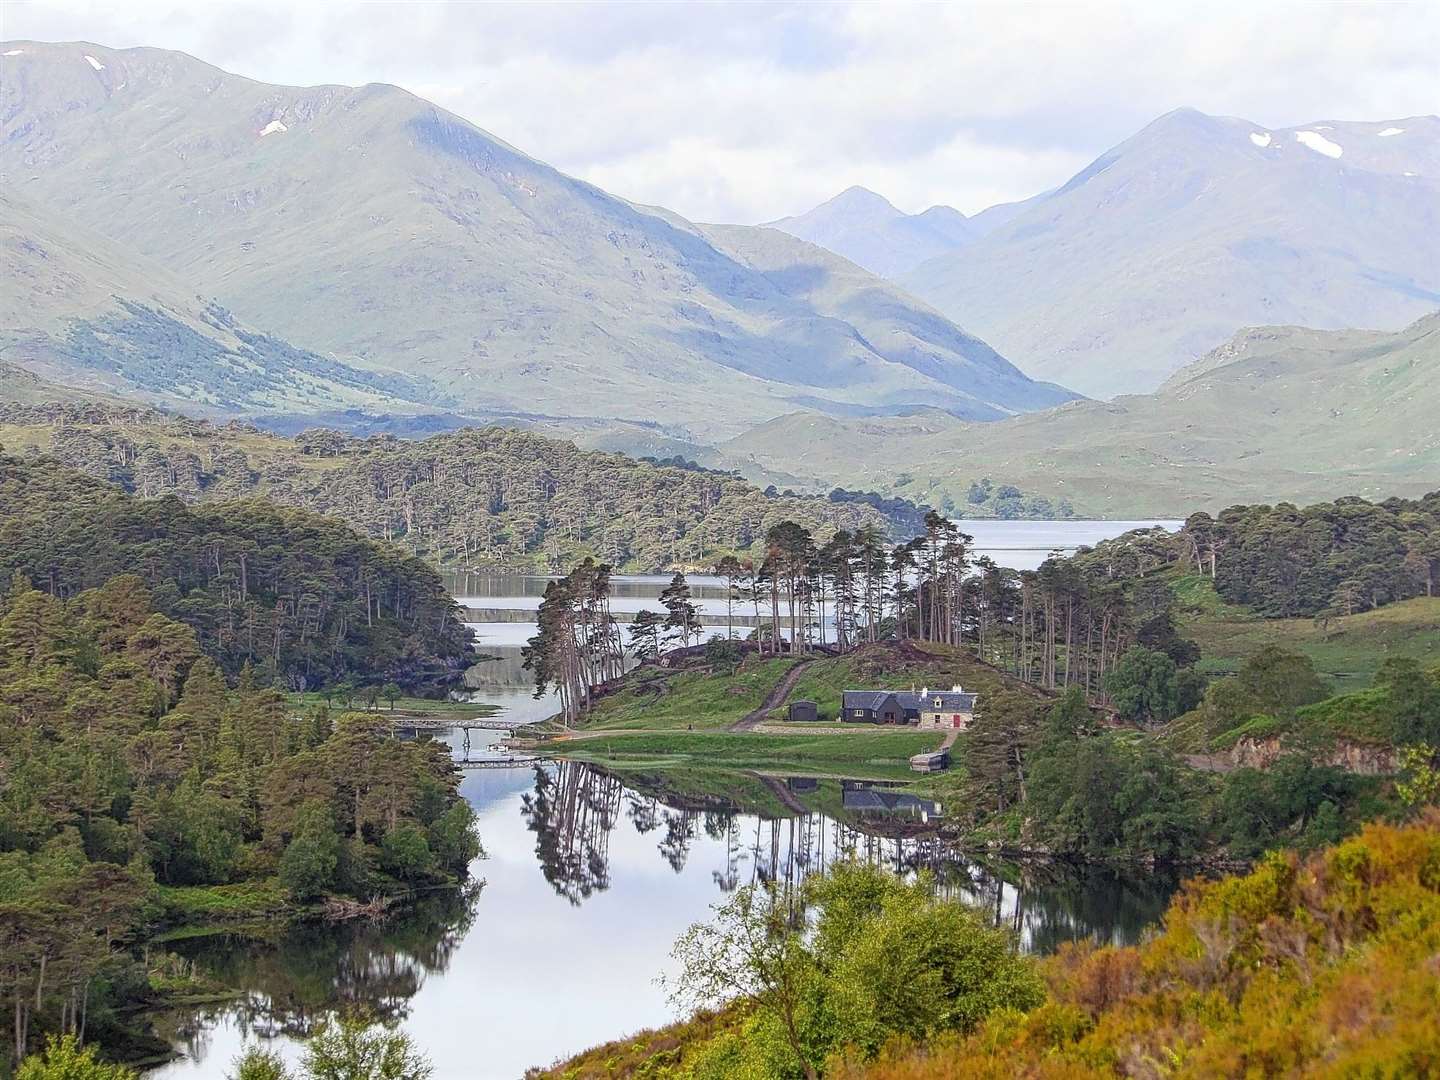 The lodge (pictured) is nestled on the shores of Loch Affric..